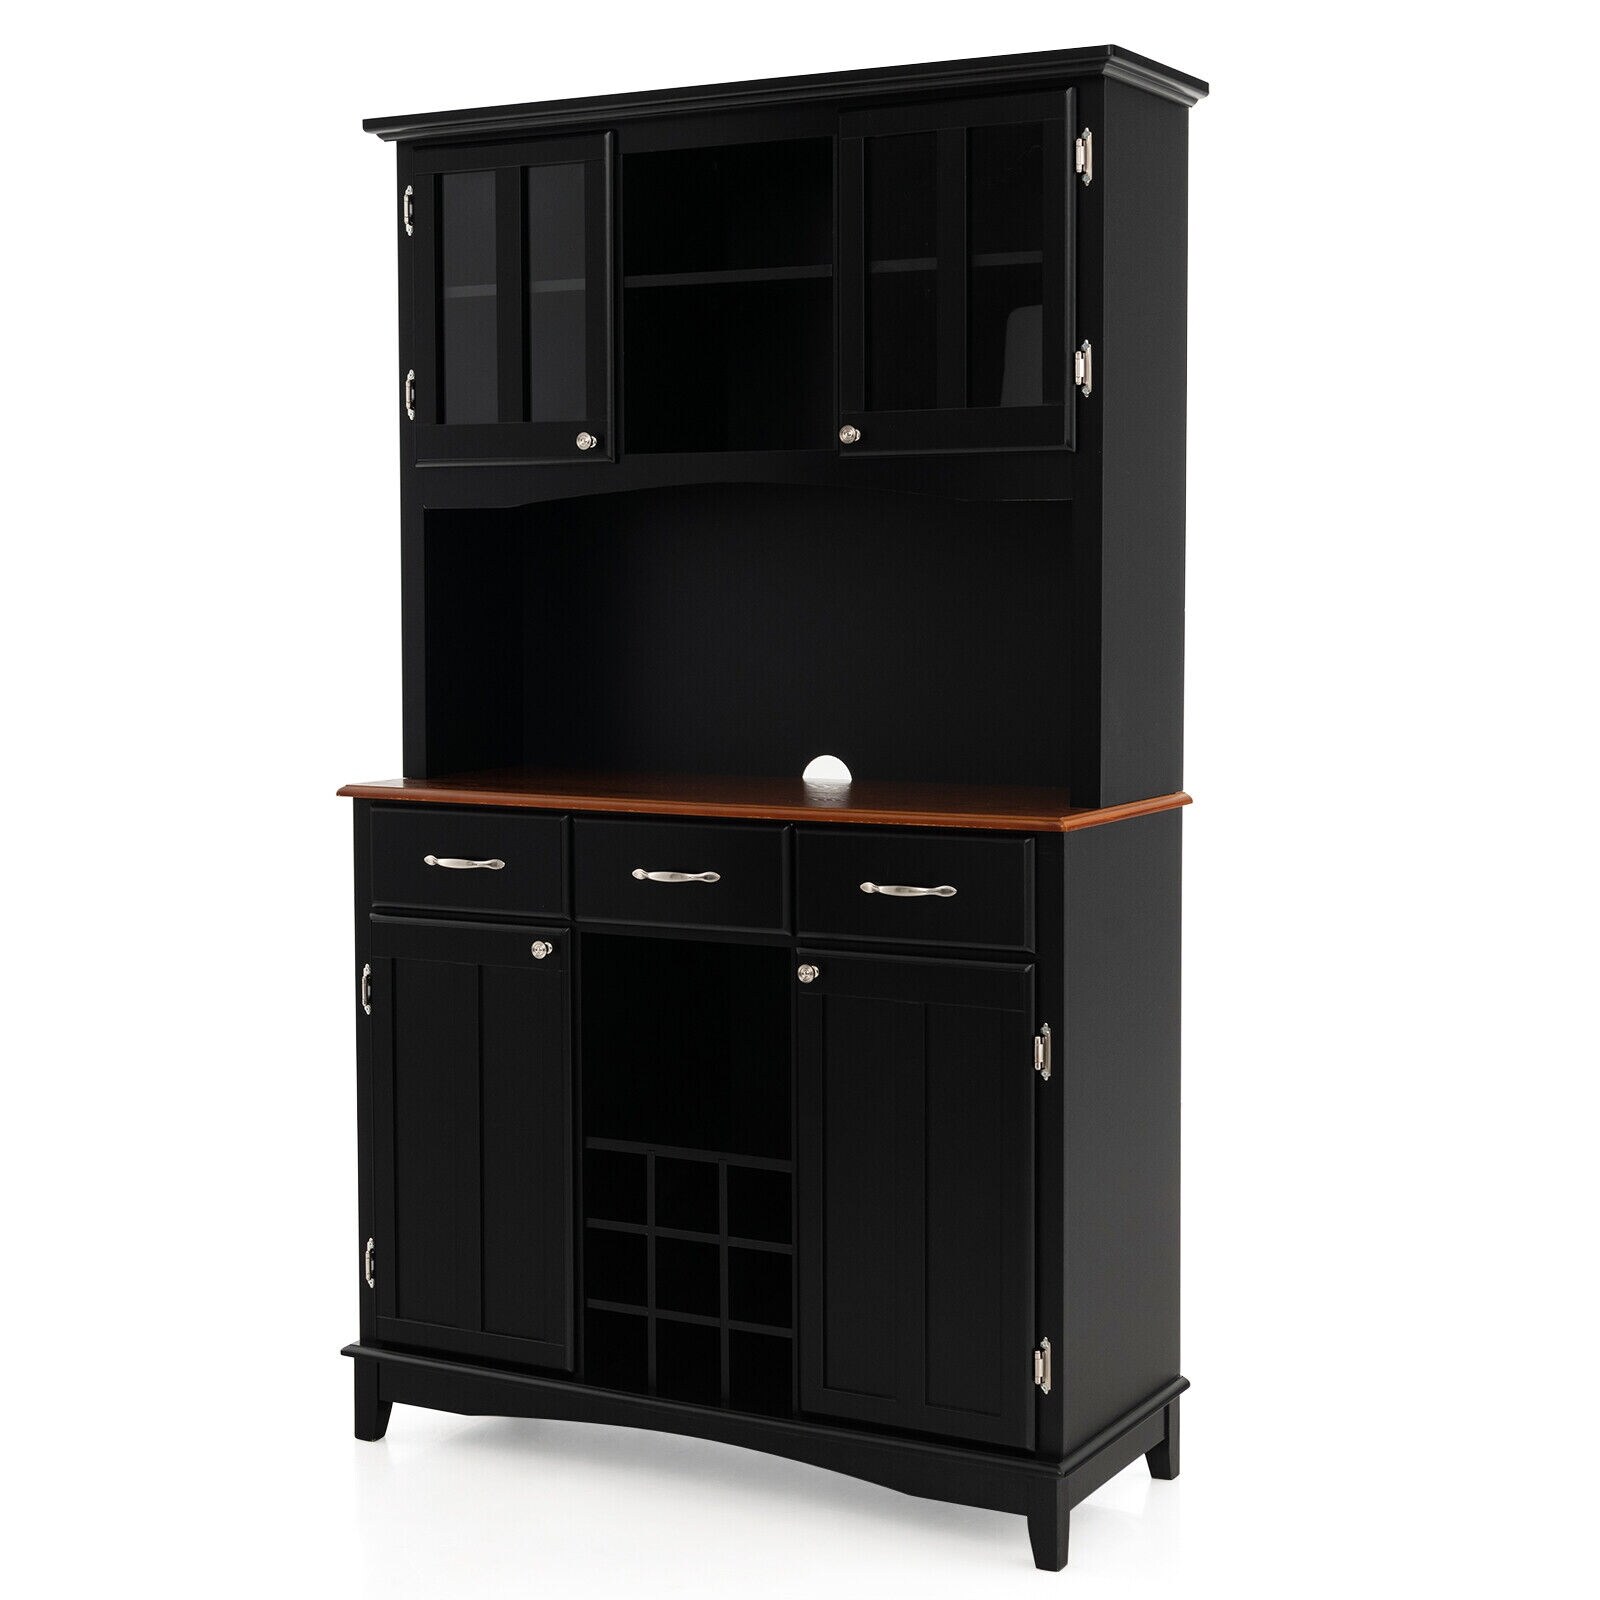 https://ak1.ostkcdn.com/images/products/is/images/direct/0e5b1fcf1ccc12cd67bea3d13e1604a7e7145afc/Buffet-And-Hutch-Kitchen-Storage-Cabinet.jpg